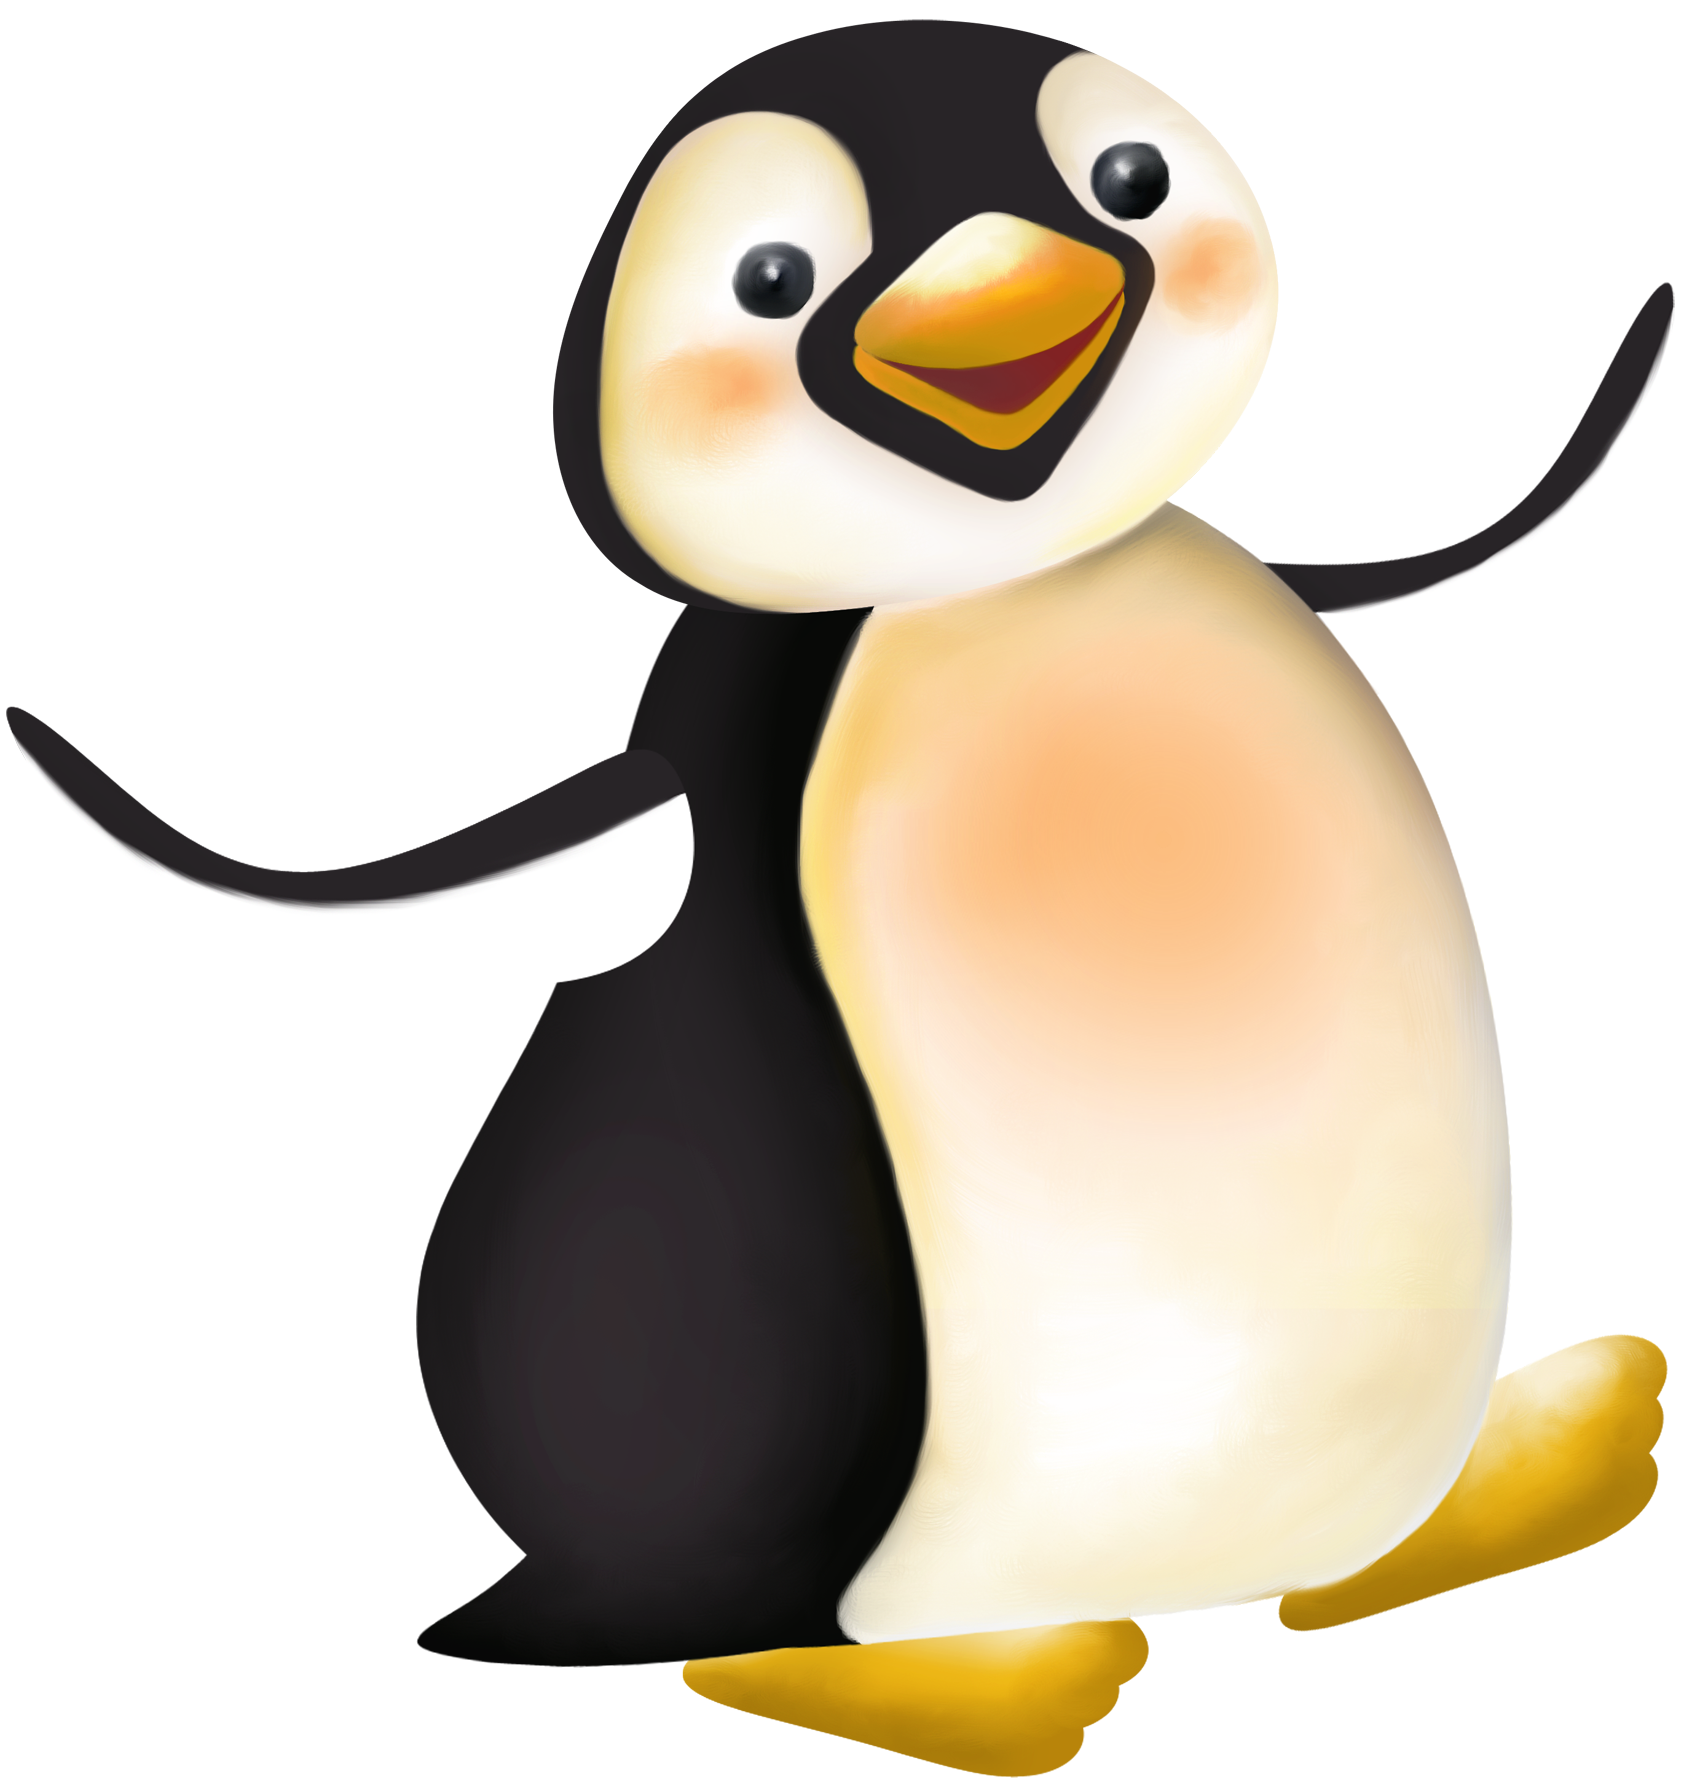 Penguin in blue T-shirt clipart. Free download transparent .PNG